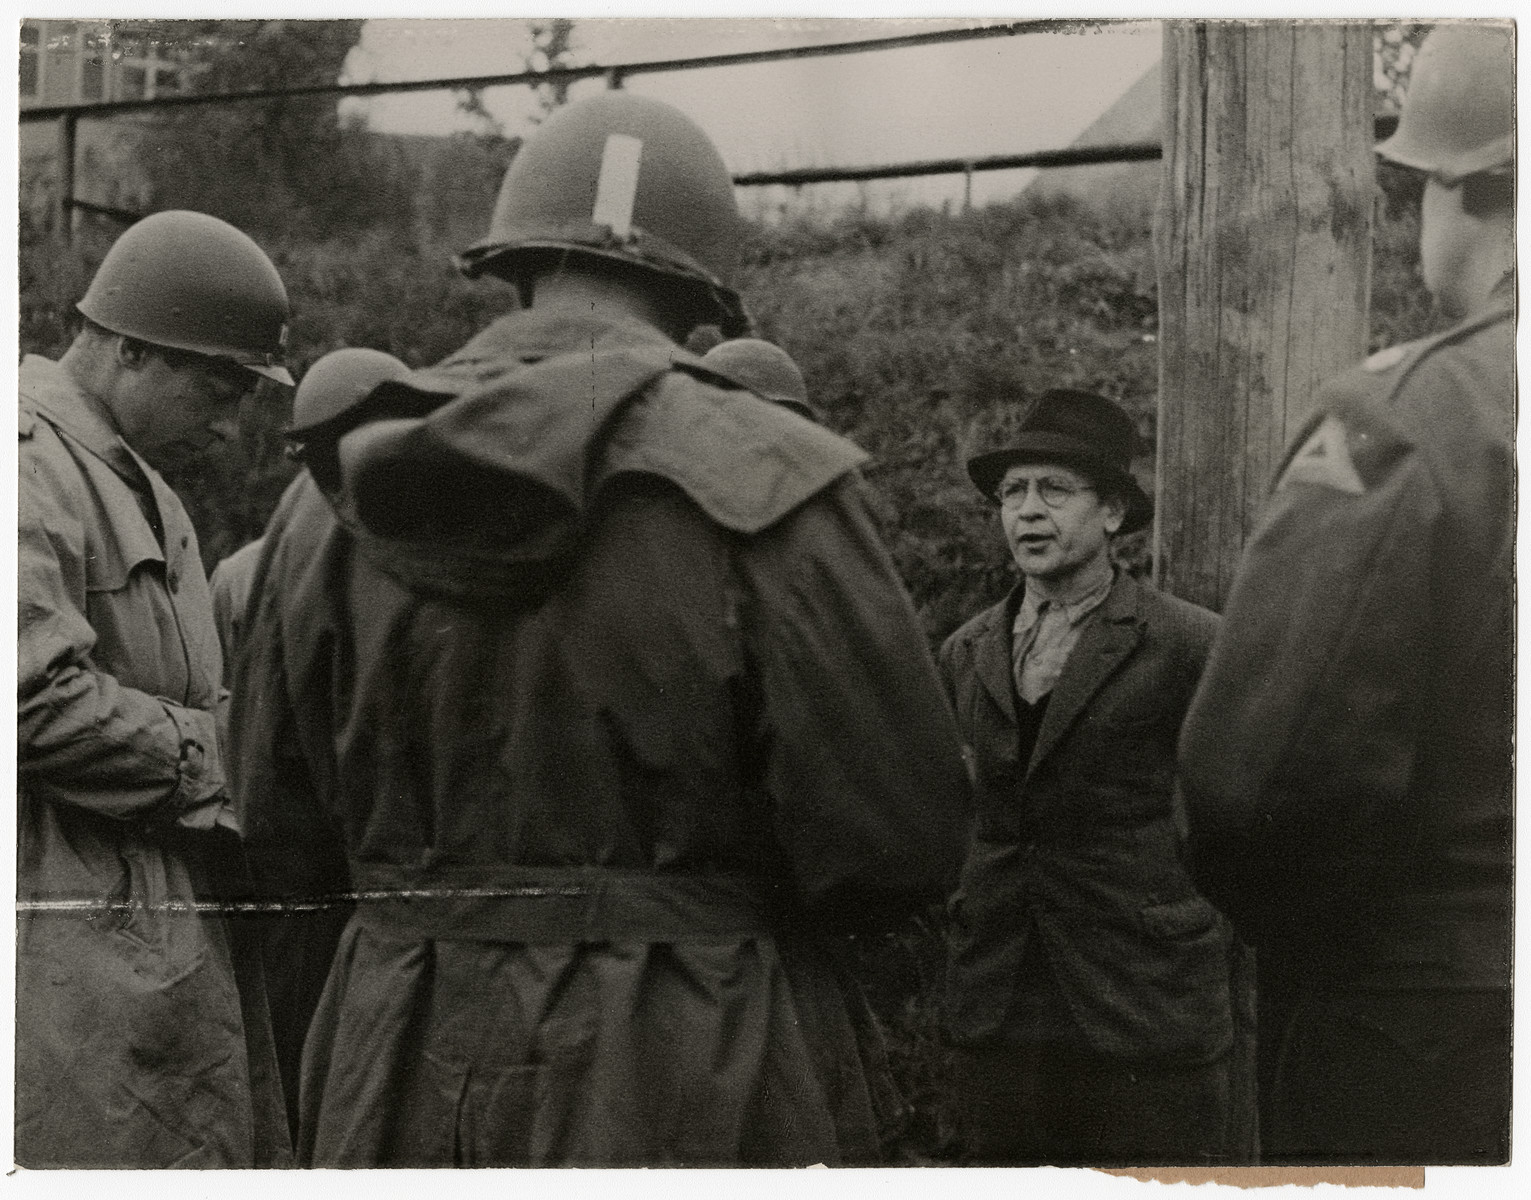 A German spy says his last words before his execution.

Original caption reads: 
Nazi Spy Shot After Military Trial
Richard Jarczyk, Nazi soldier, who became a spy in civilian clothes, was executed April 23, 1945, after court trial by a military commission of the Seventh U.S. Army. After he had discarded his uniform, Jarczyk, former member of the Volks Grenadier Division, approached U.S. Army officials and offered his services in establishing a civilian government in an occupied area of the Reich. U. S. Military authorities discovered his true role and he was brought to trial April 6, when he confessed special training for sabotage and espionage. The penalty was death by a firing squad. 

THIS PHOTO SHOWS: The doomed spy speaks his last words before being shot.